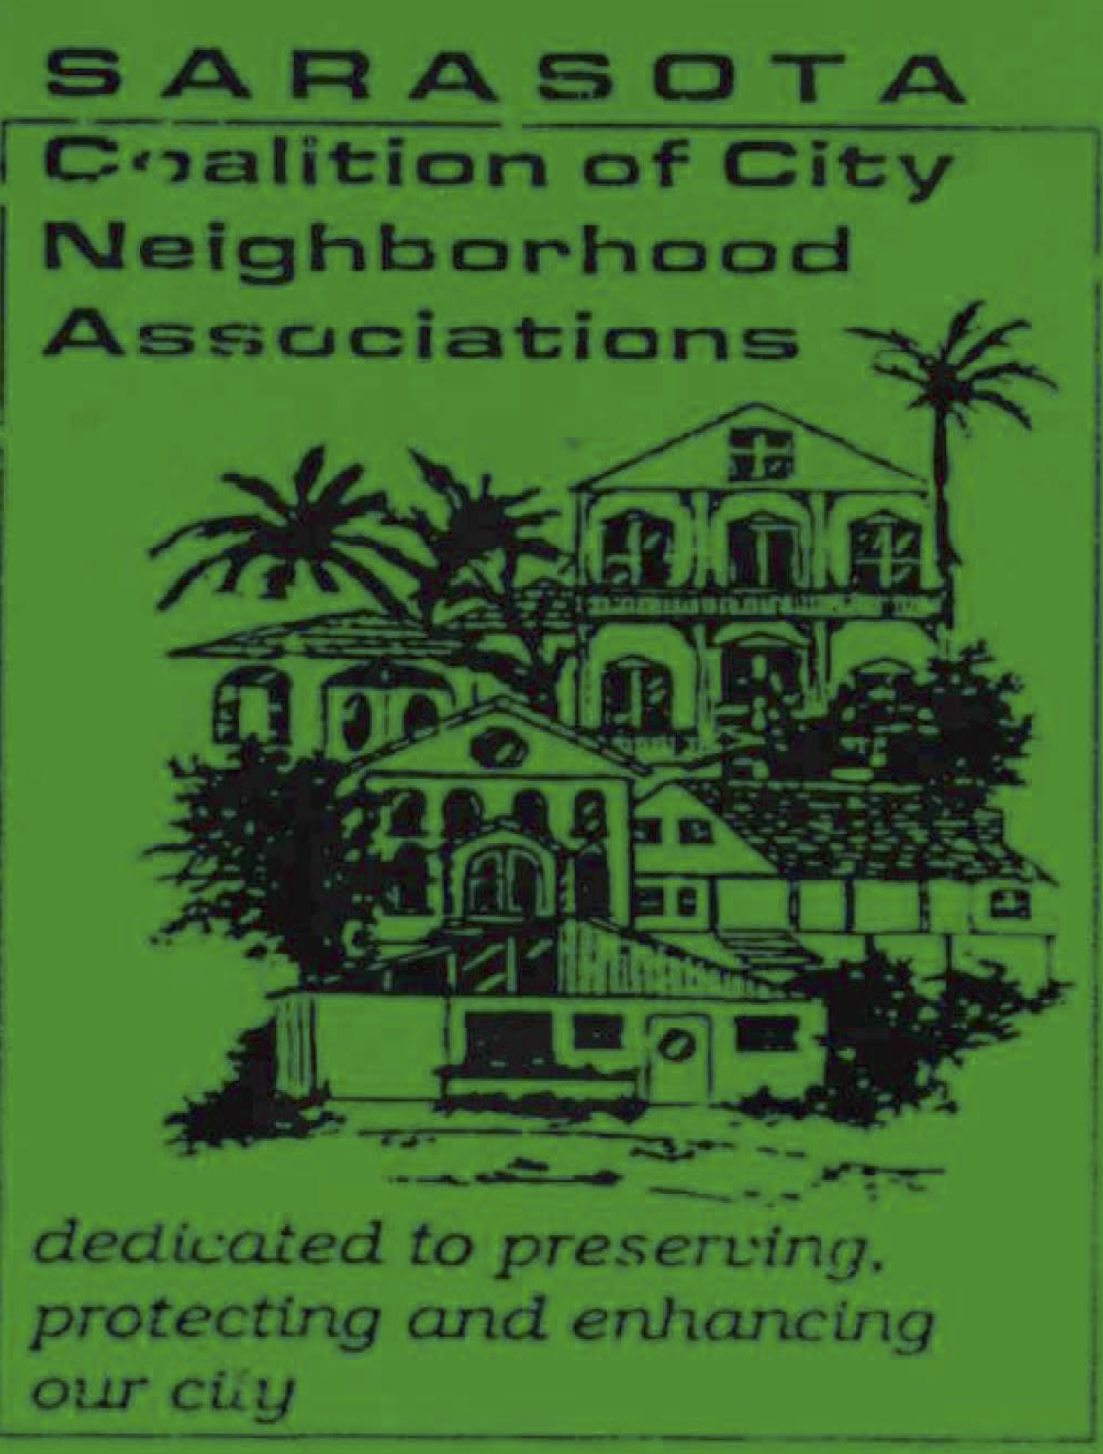 As part of a report on the 30th anniversary of the Coalition of City Neighborhood Associations, members included some early imagery the group used to identify itself. Image courtesy CCNA.